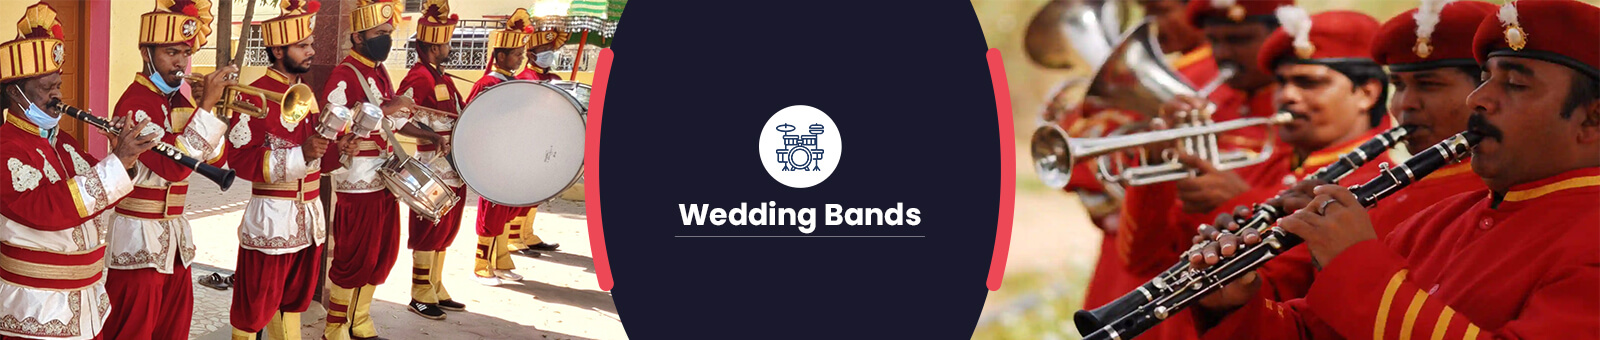 Wedding Bands in Indore